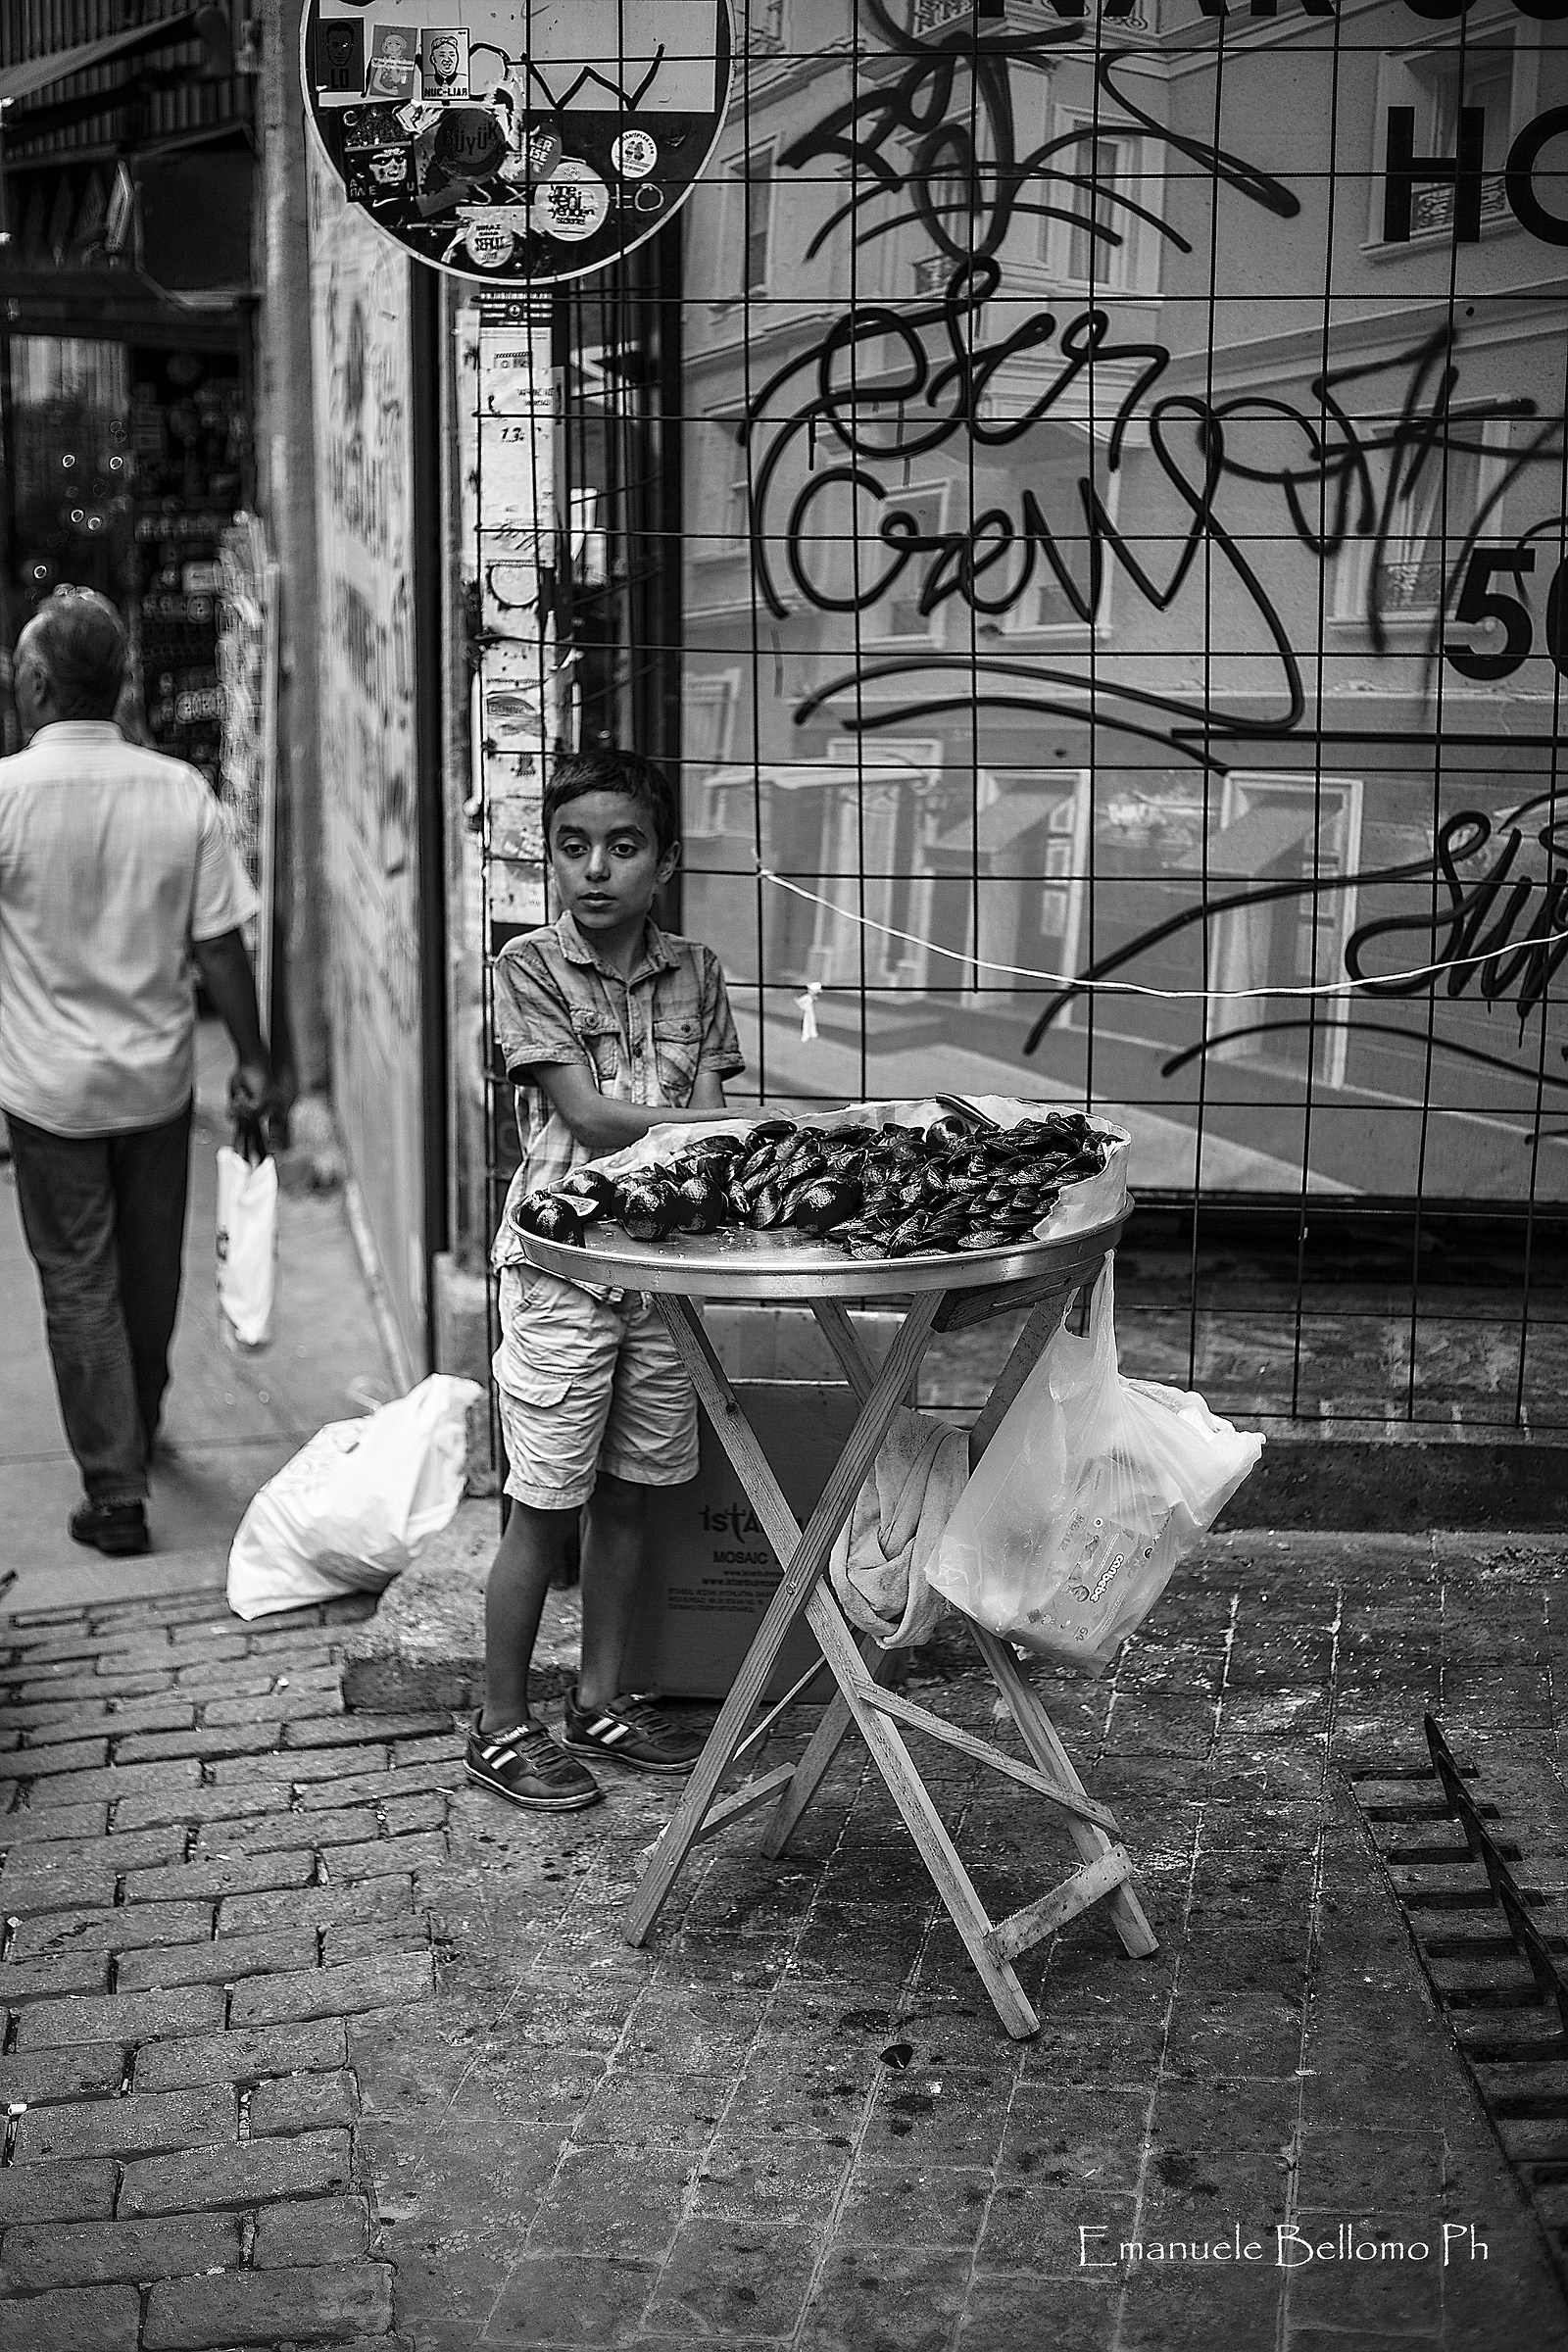 Mussels in the street...